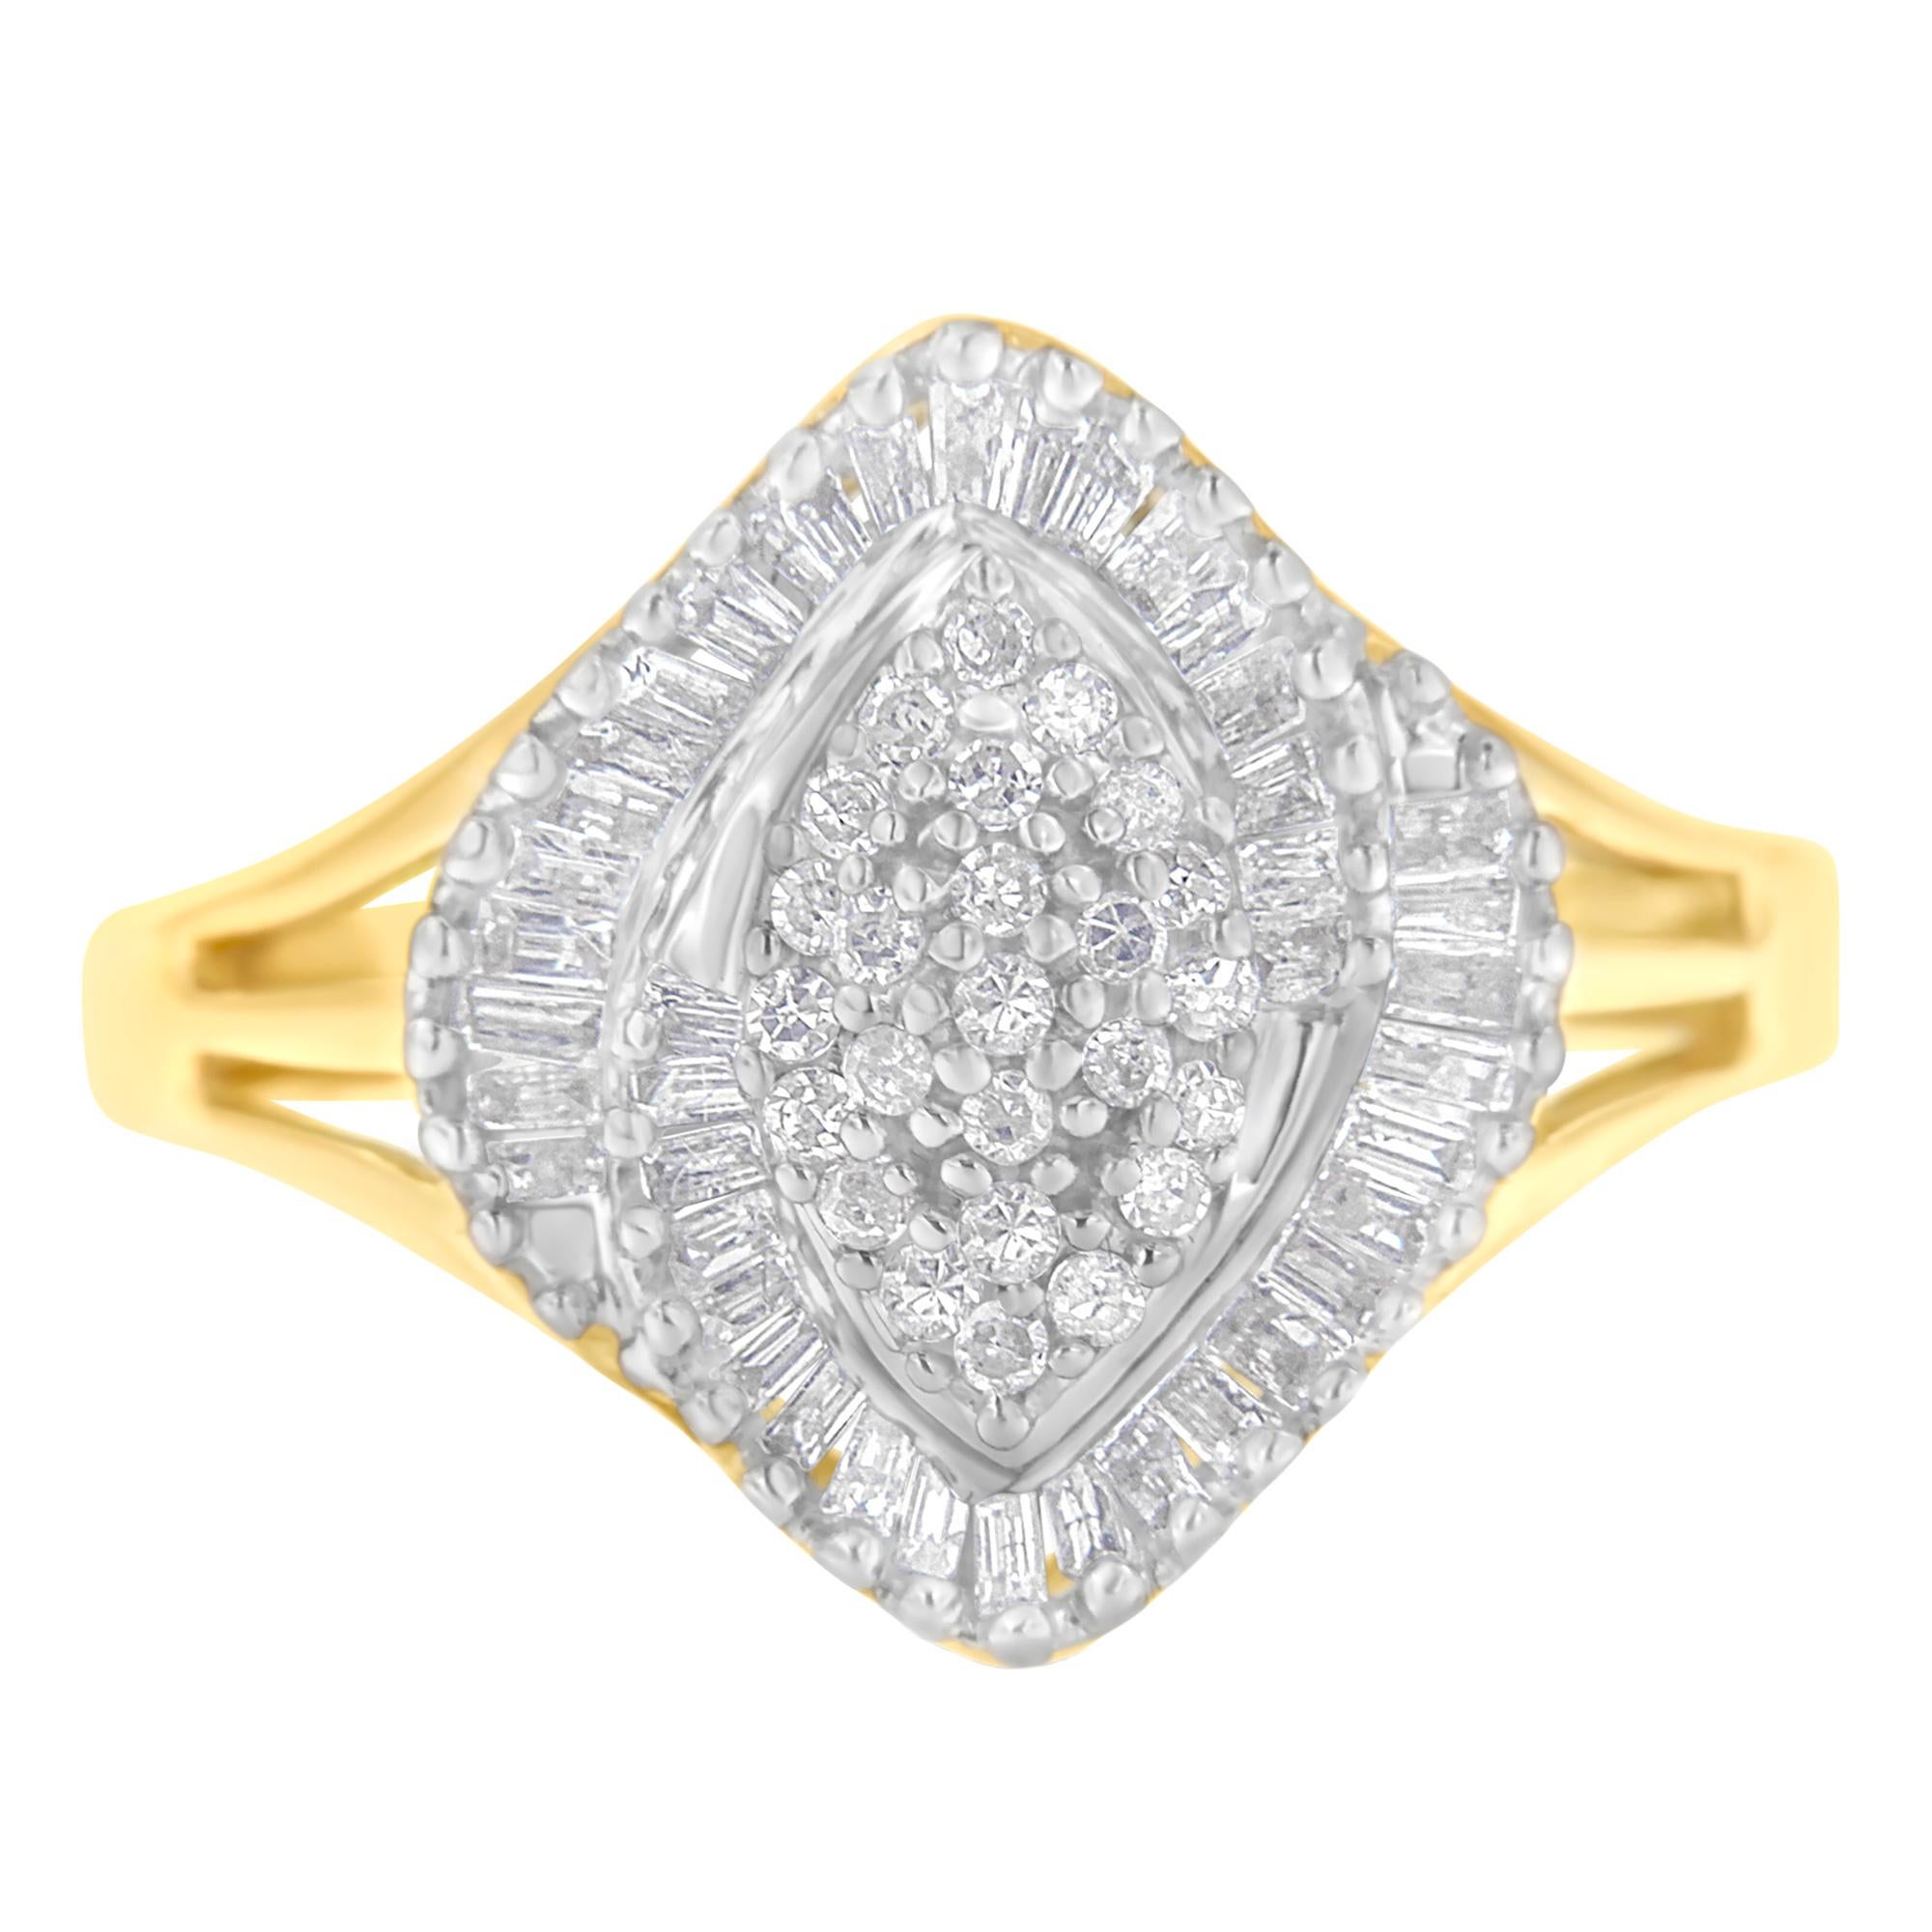 For Sale:  10K Yellow Gold 1/2 Carat Diamond Cocktail Ring 4